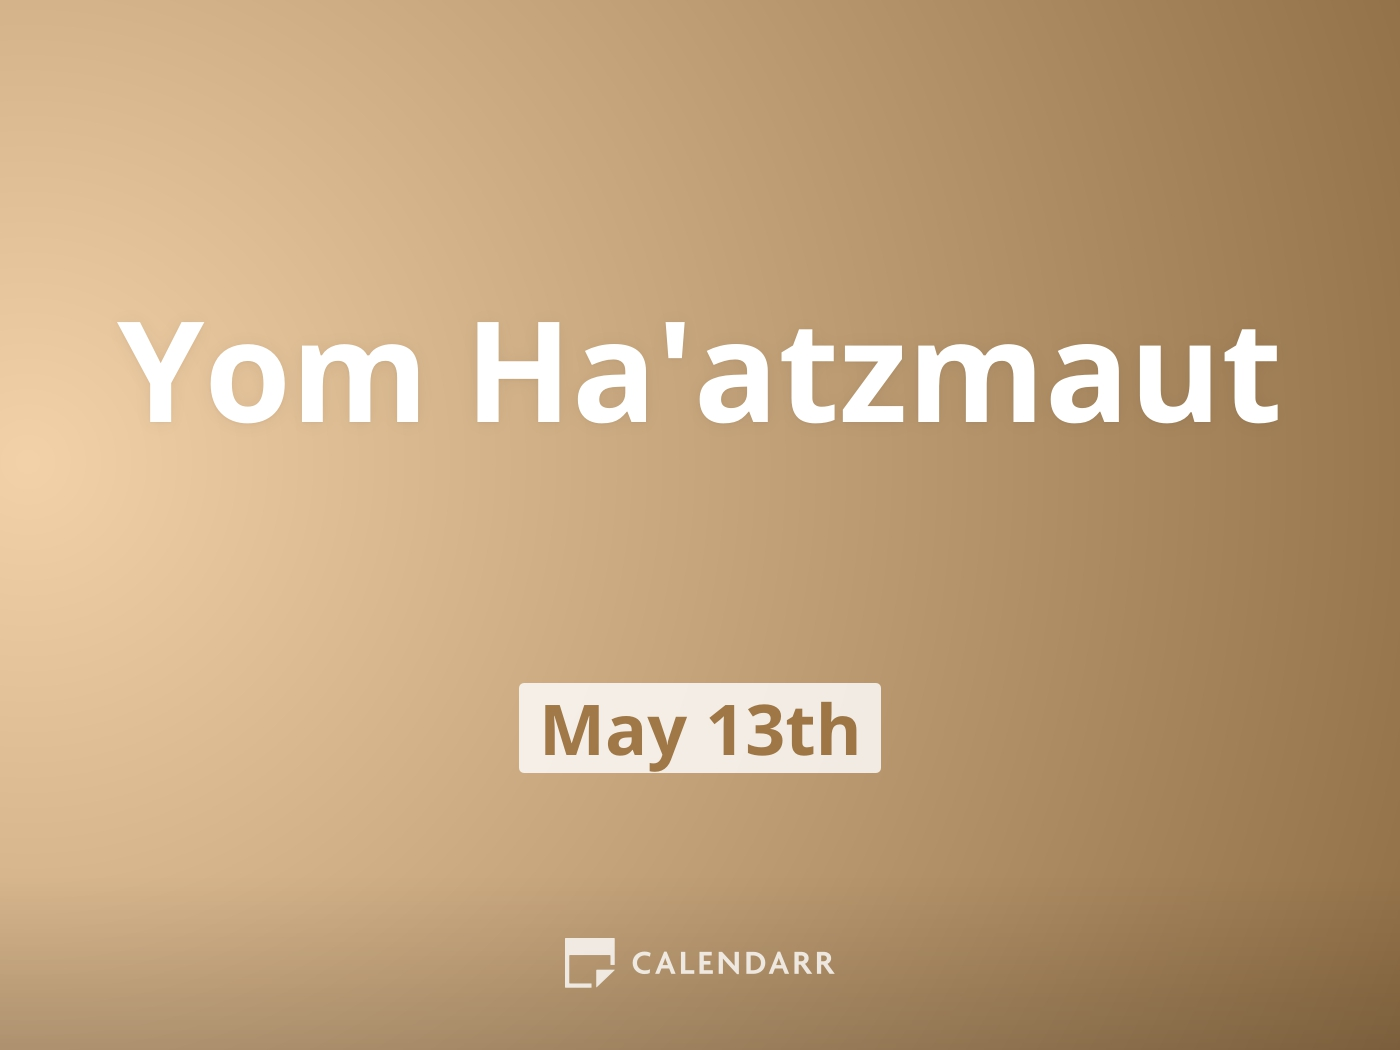 Yom Ha'atzmaut starts on May 13th and will end on May 14th in 2024